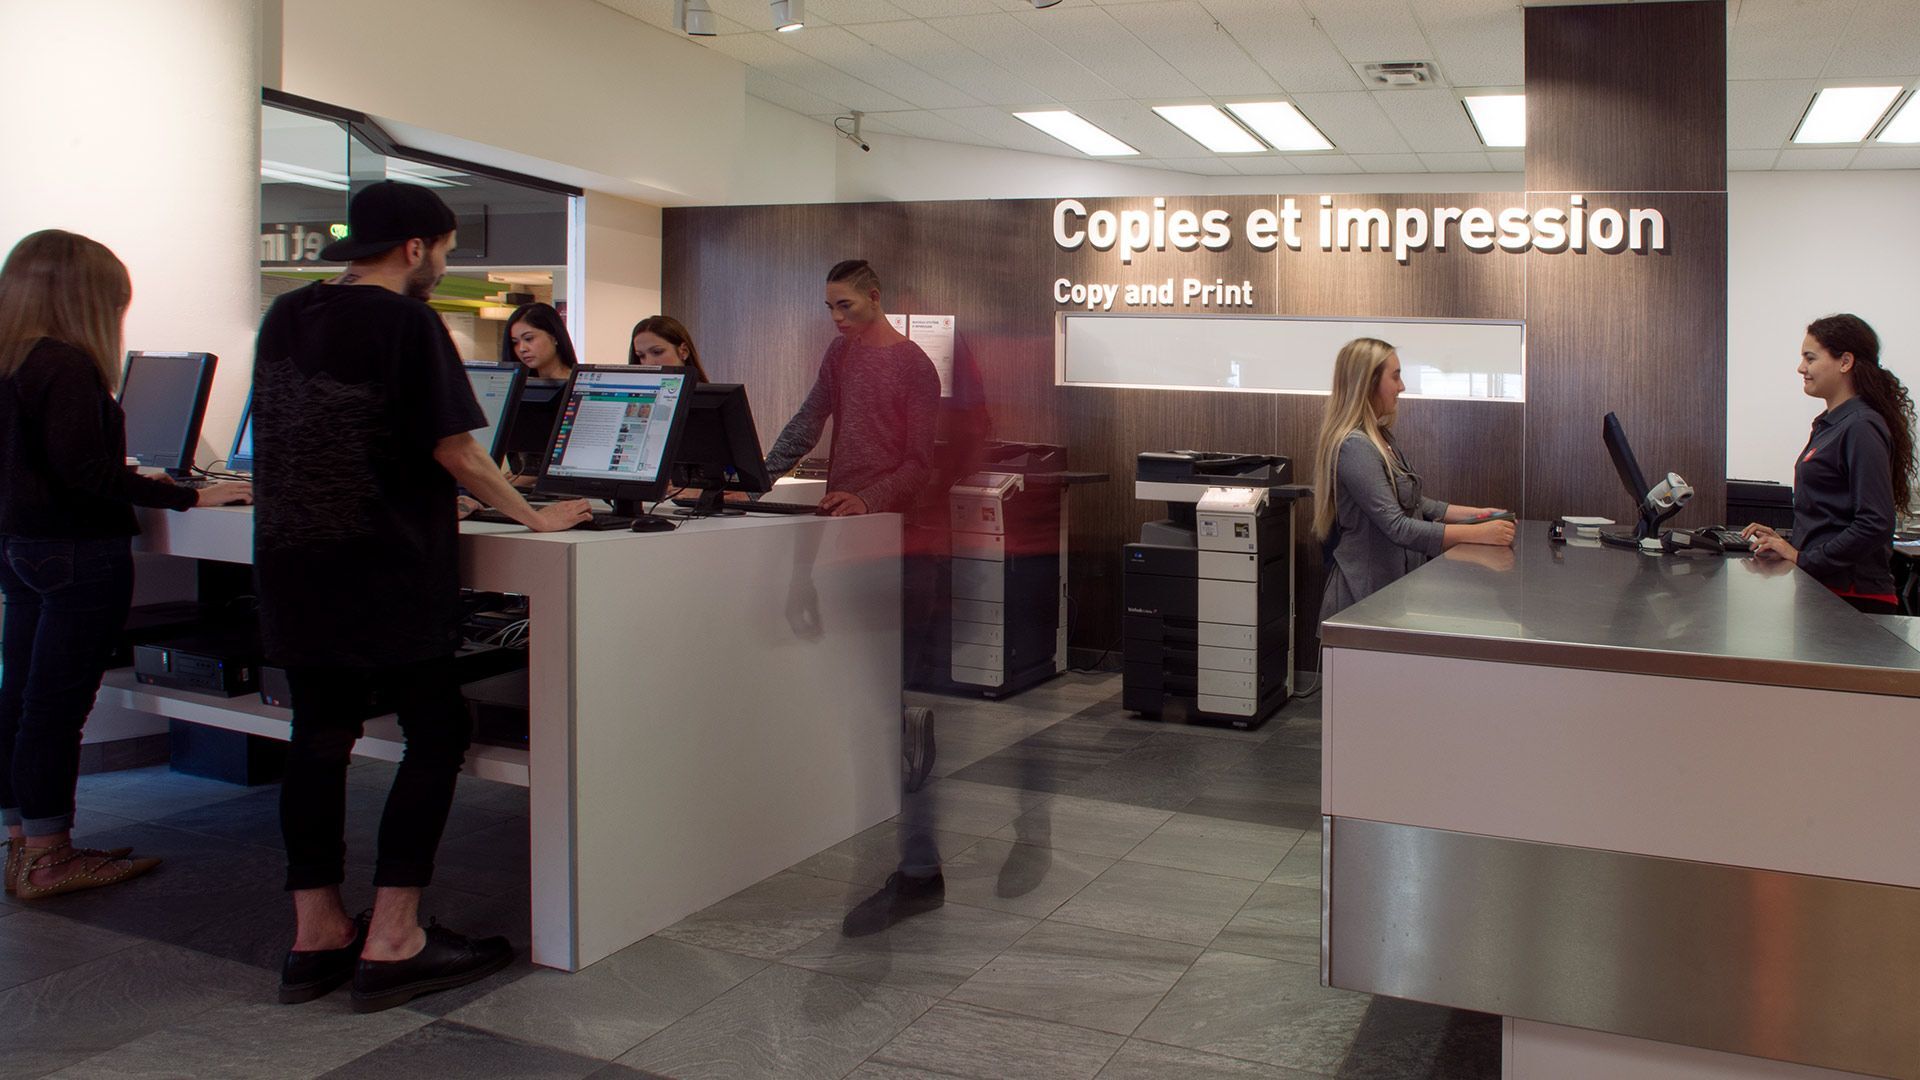 Customers and staff at a modern print service center with computers and copy machines.